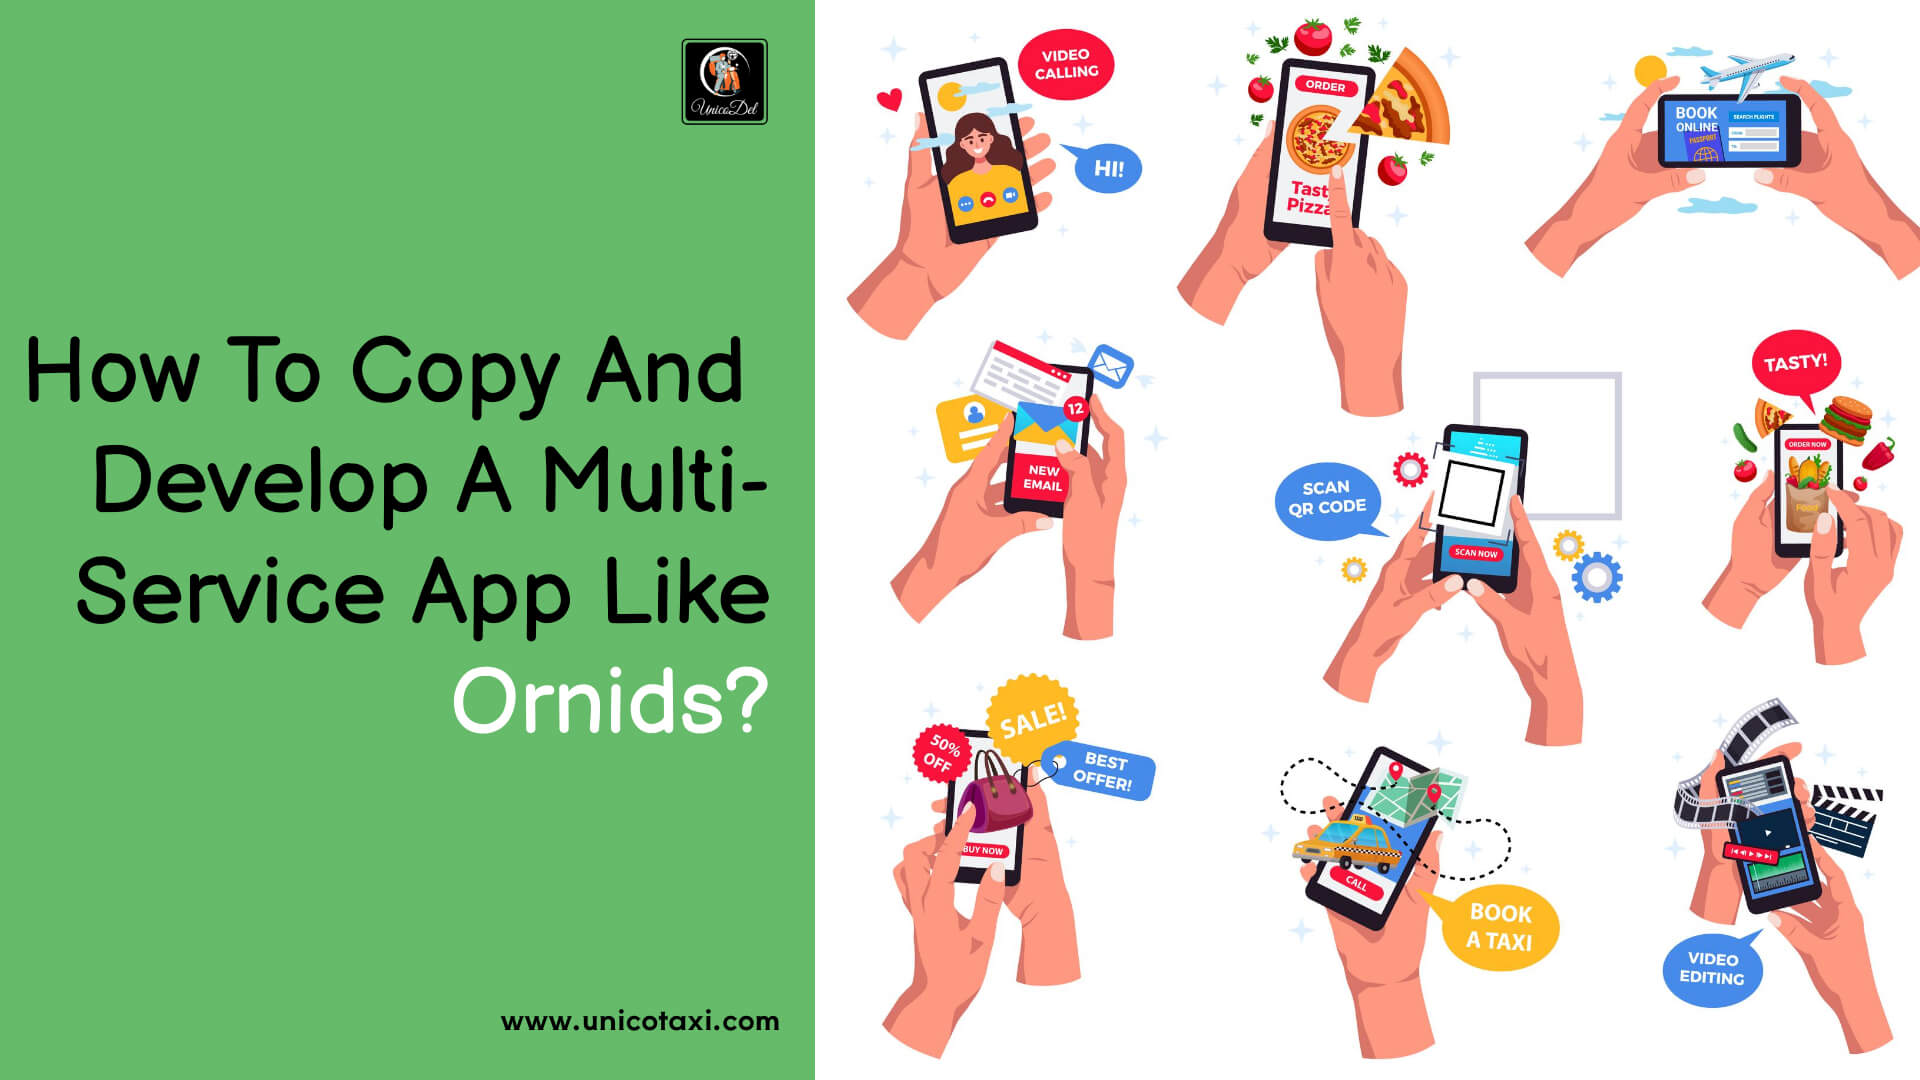 How to Copy and Develop a Multi-Service App Like Ornids?